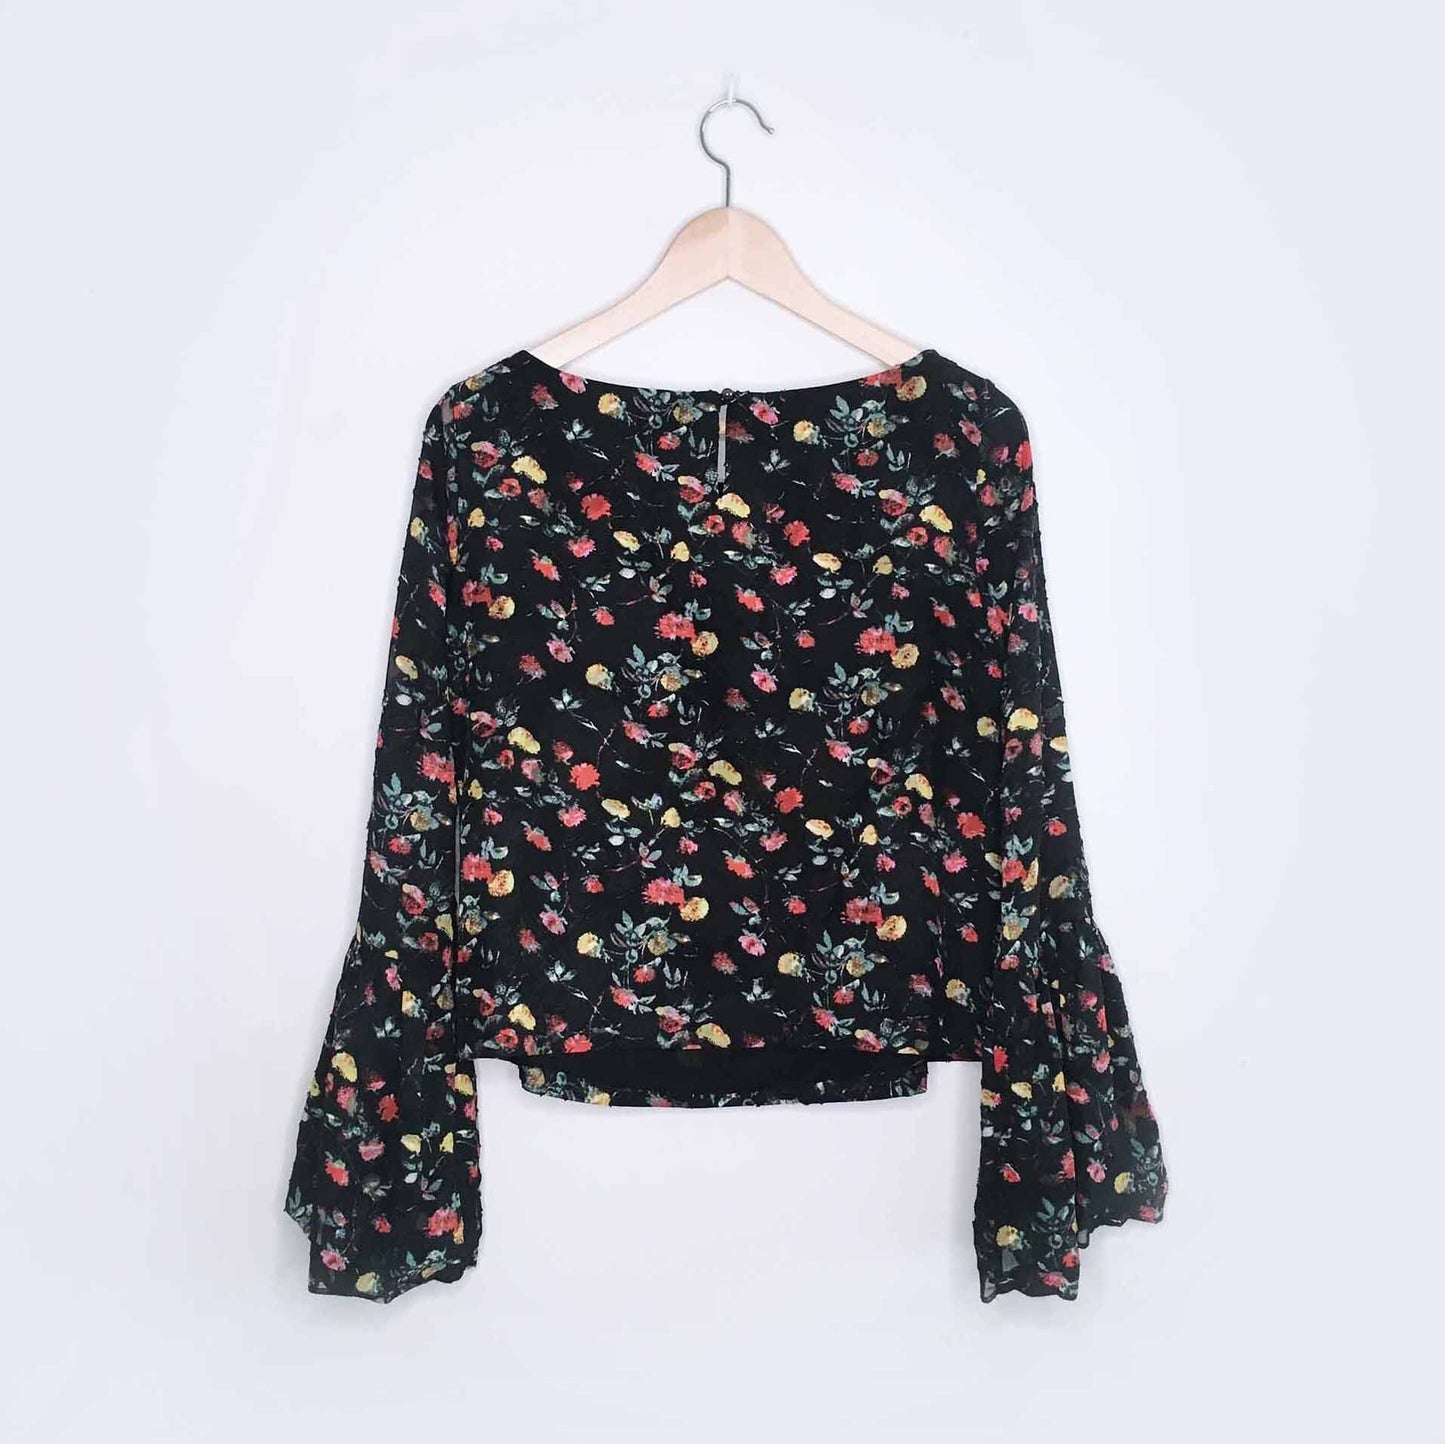 Club Monaco floral flocked blouse with bell sleeves - size Small